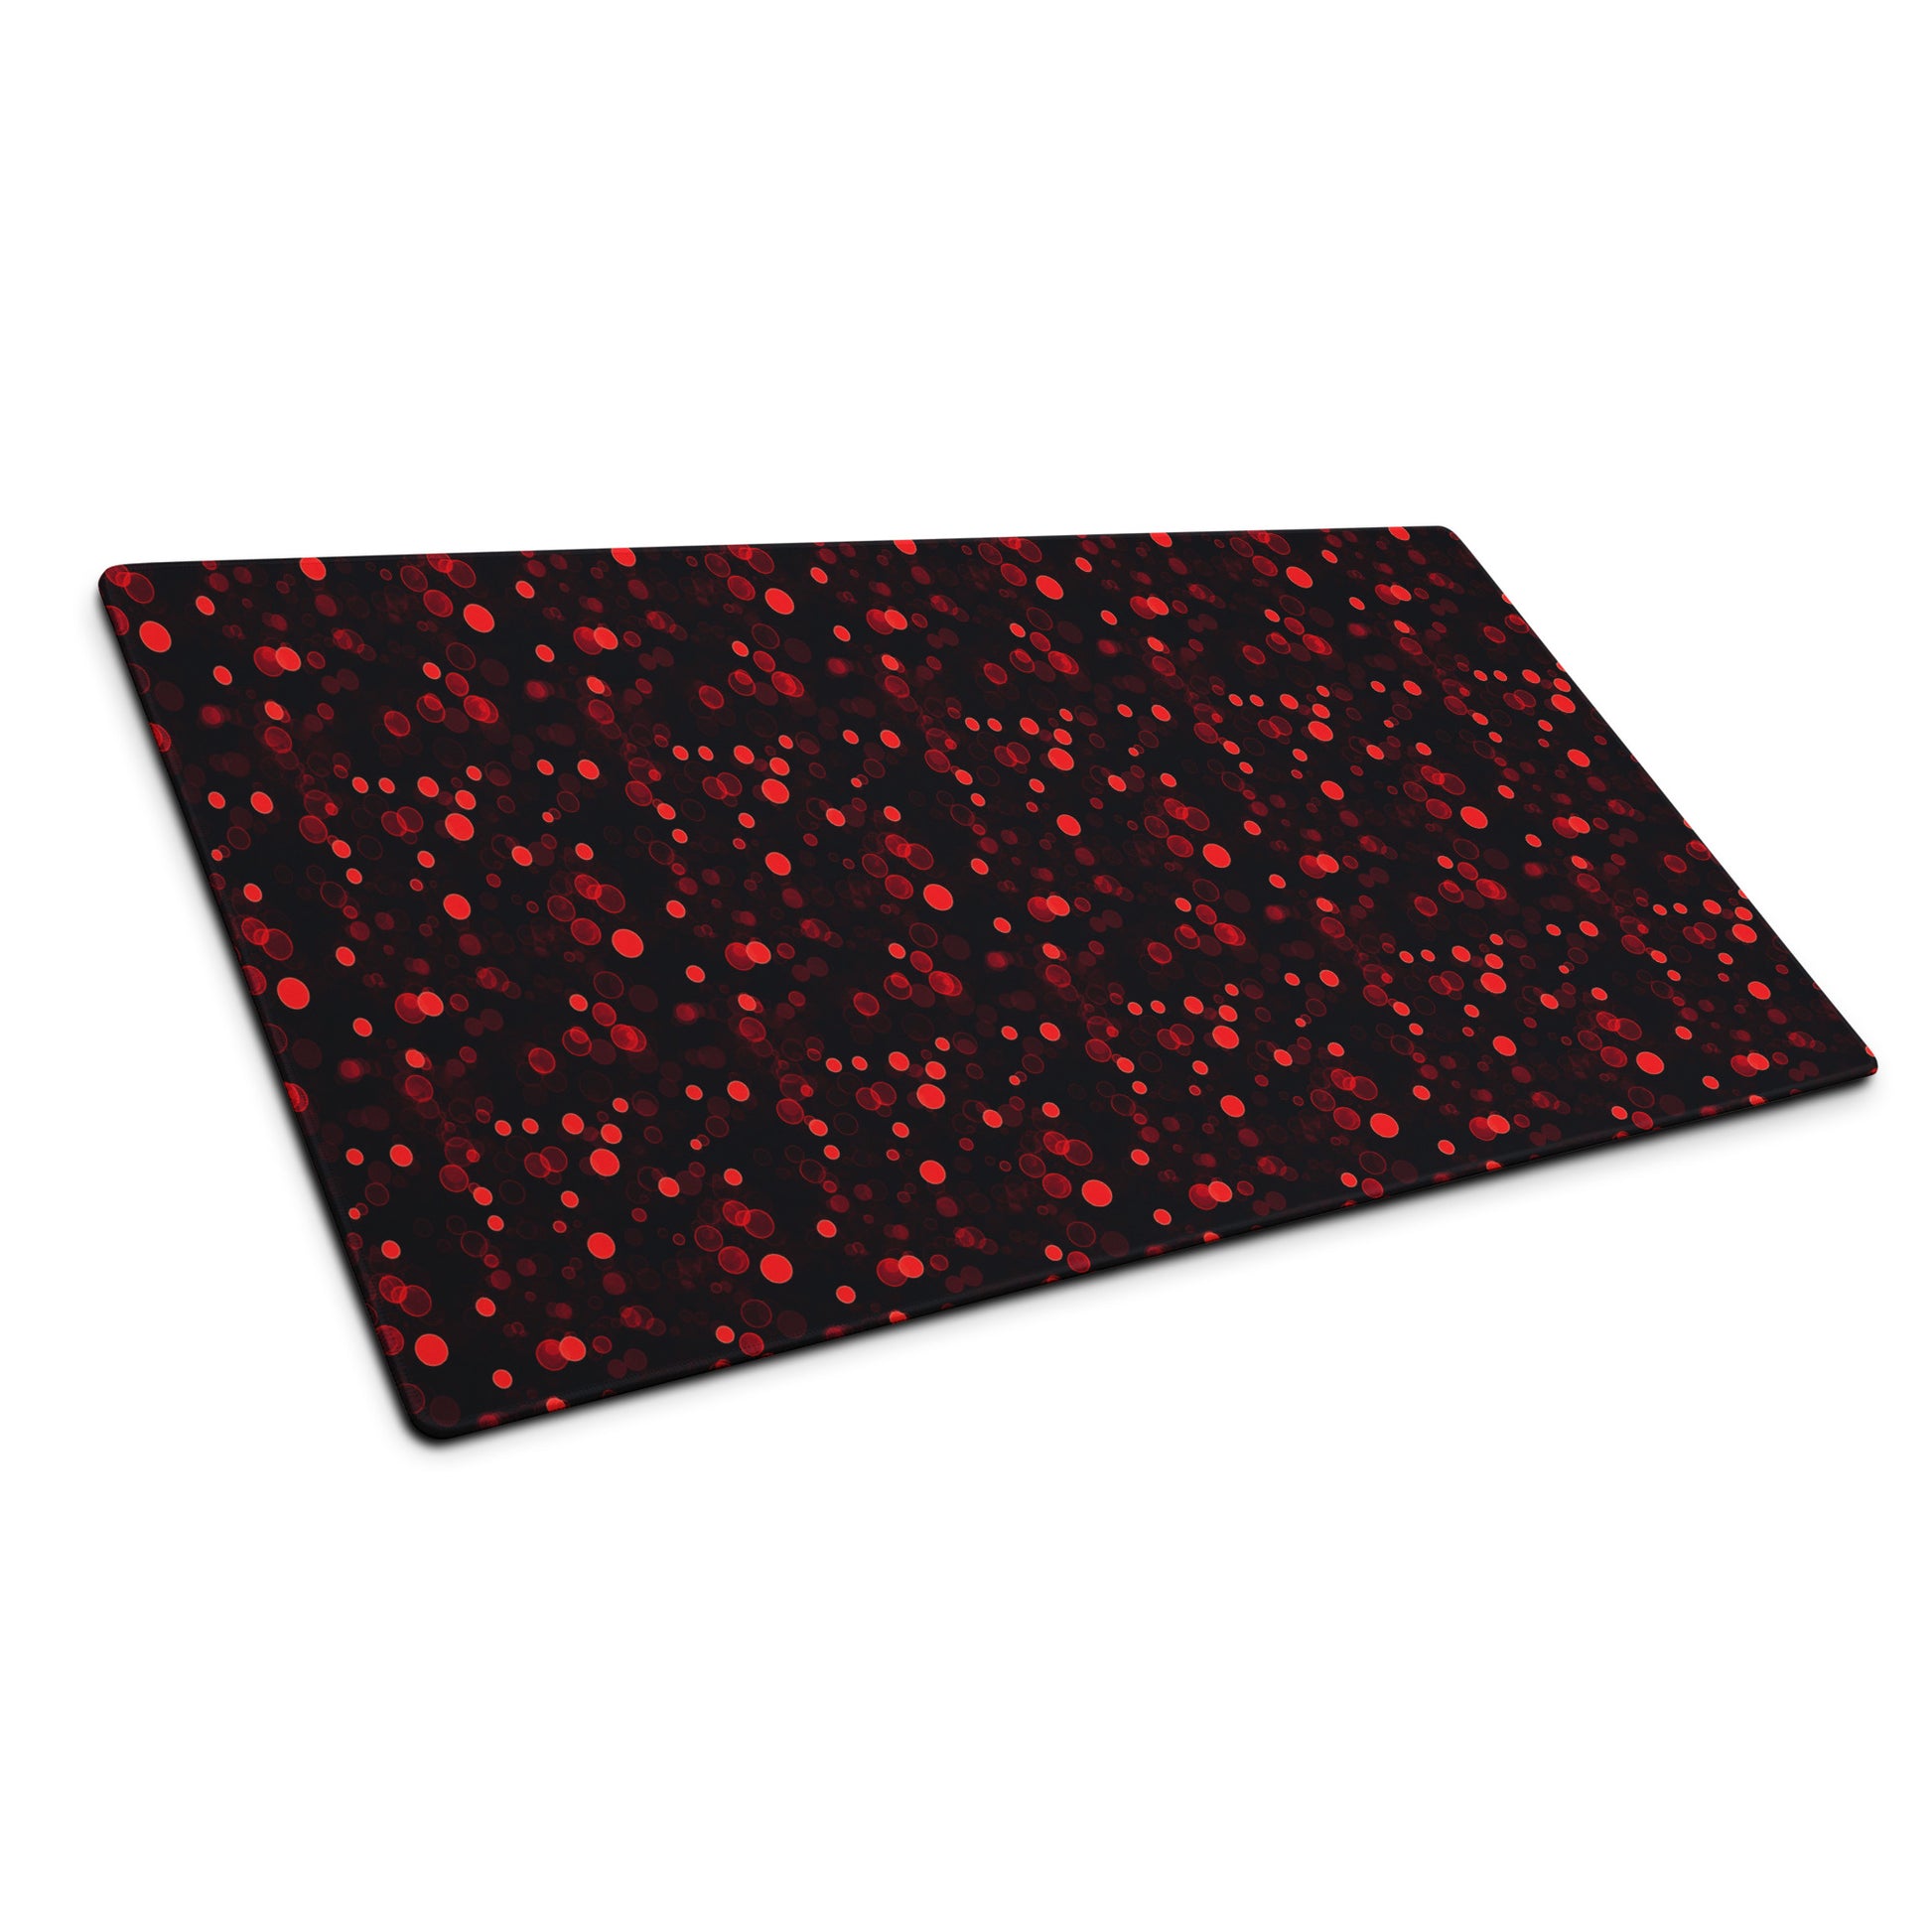 A 36" x 18" desk pad with red polka dots sitting at an angle.